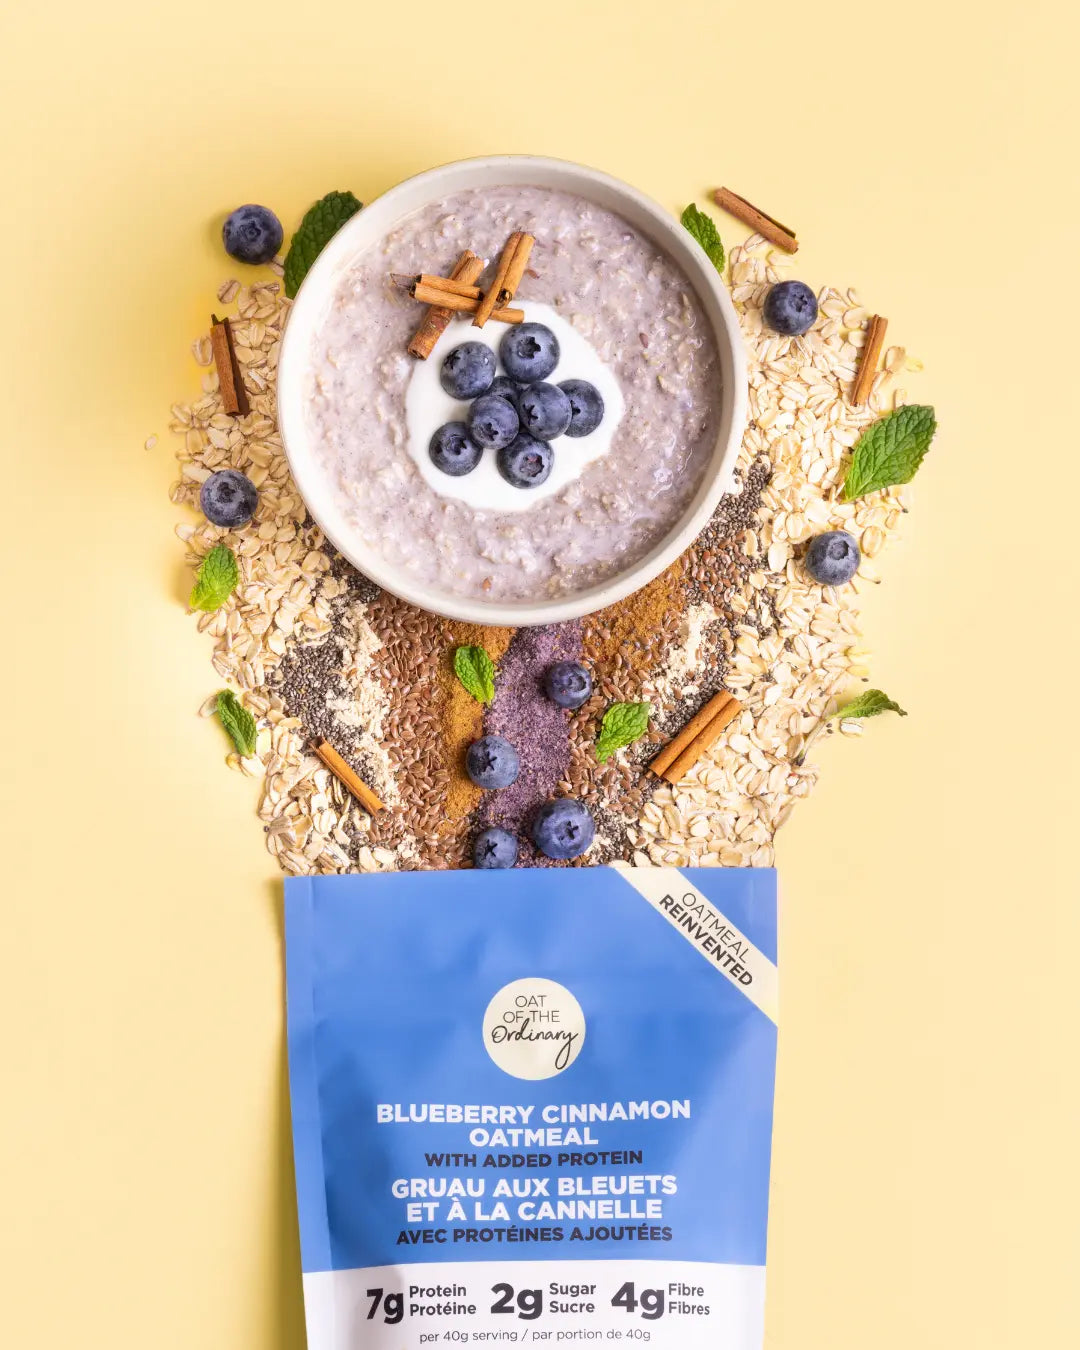 Blueberry cinnamon oatmeal bowl made with fresh blueberry, yogurt, and cinnamon toppings.